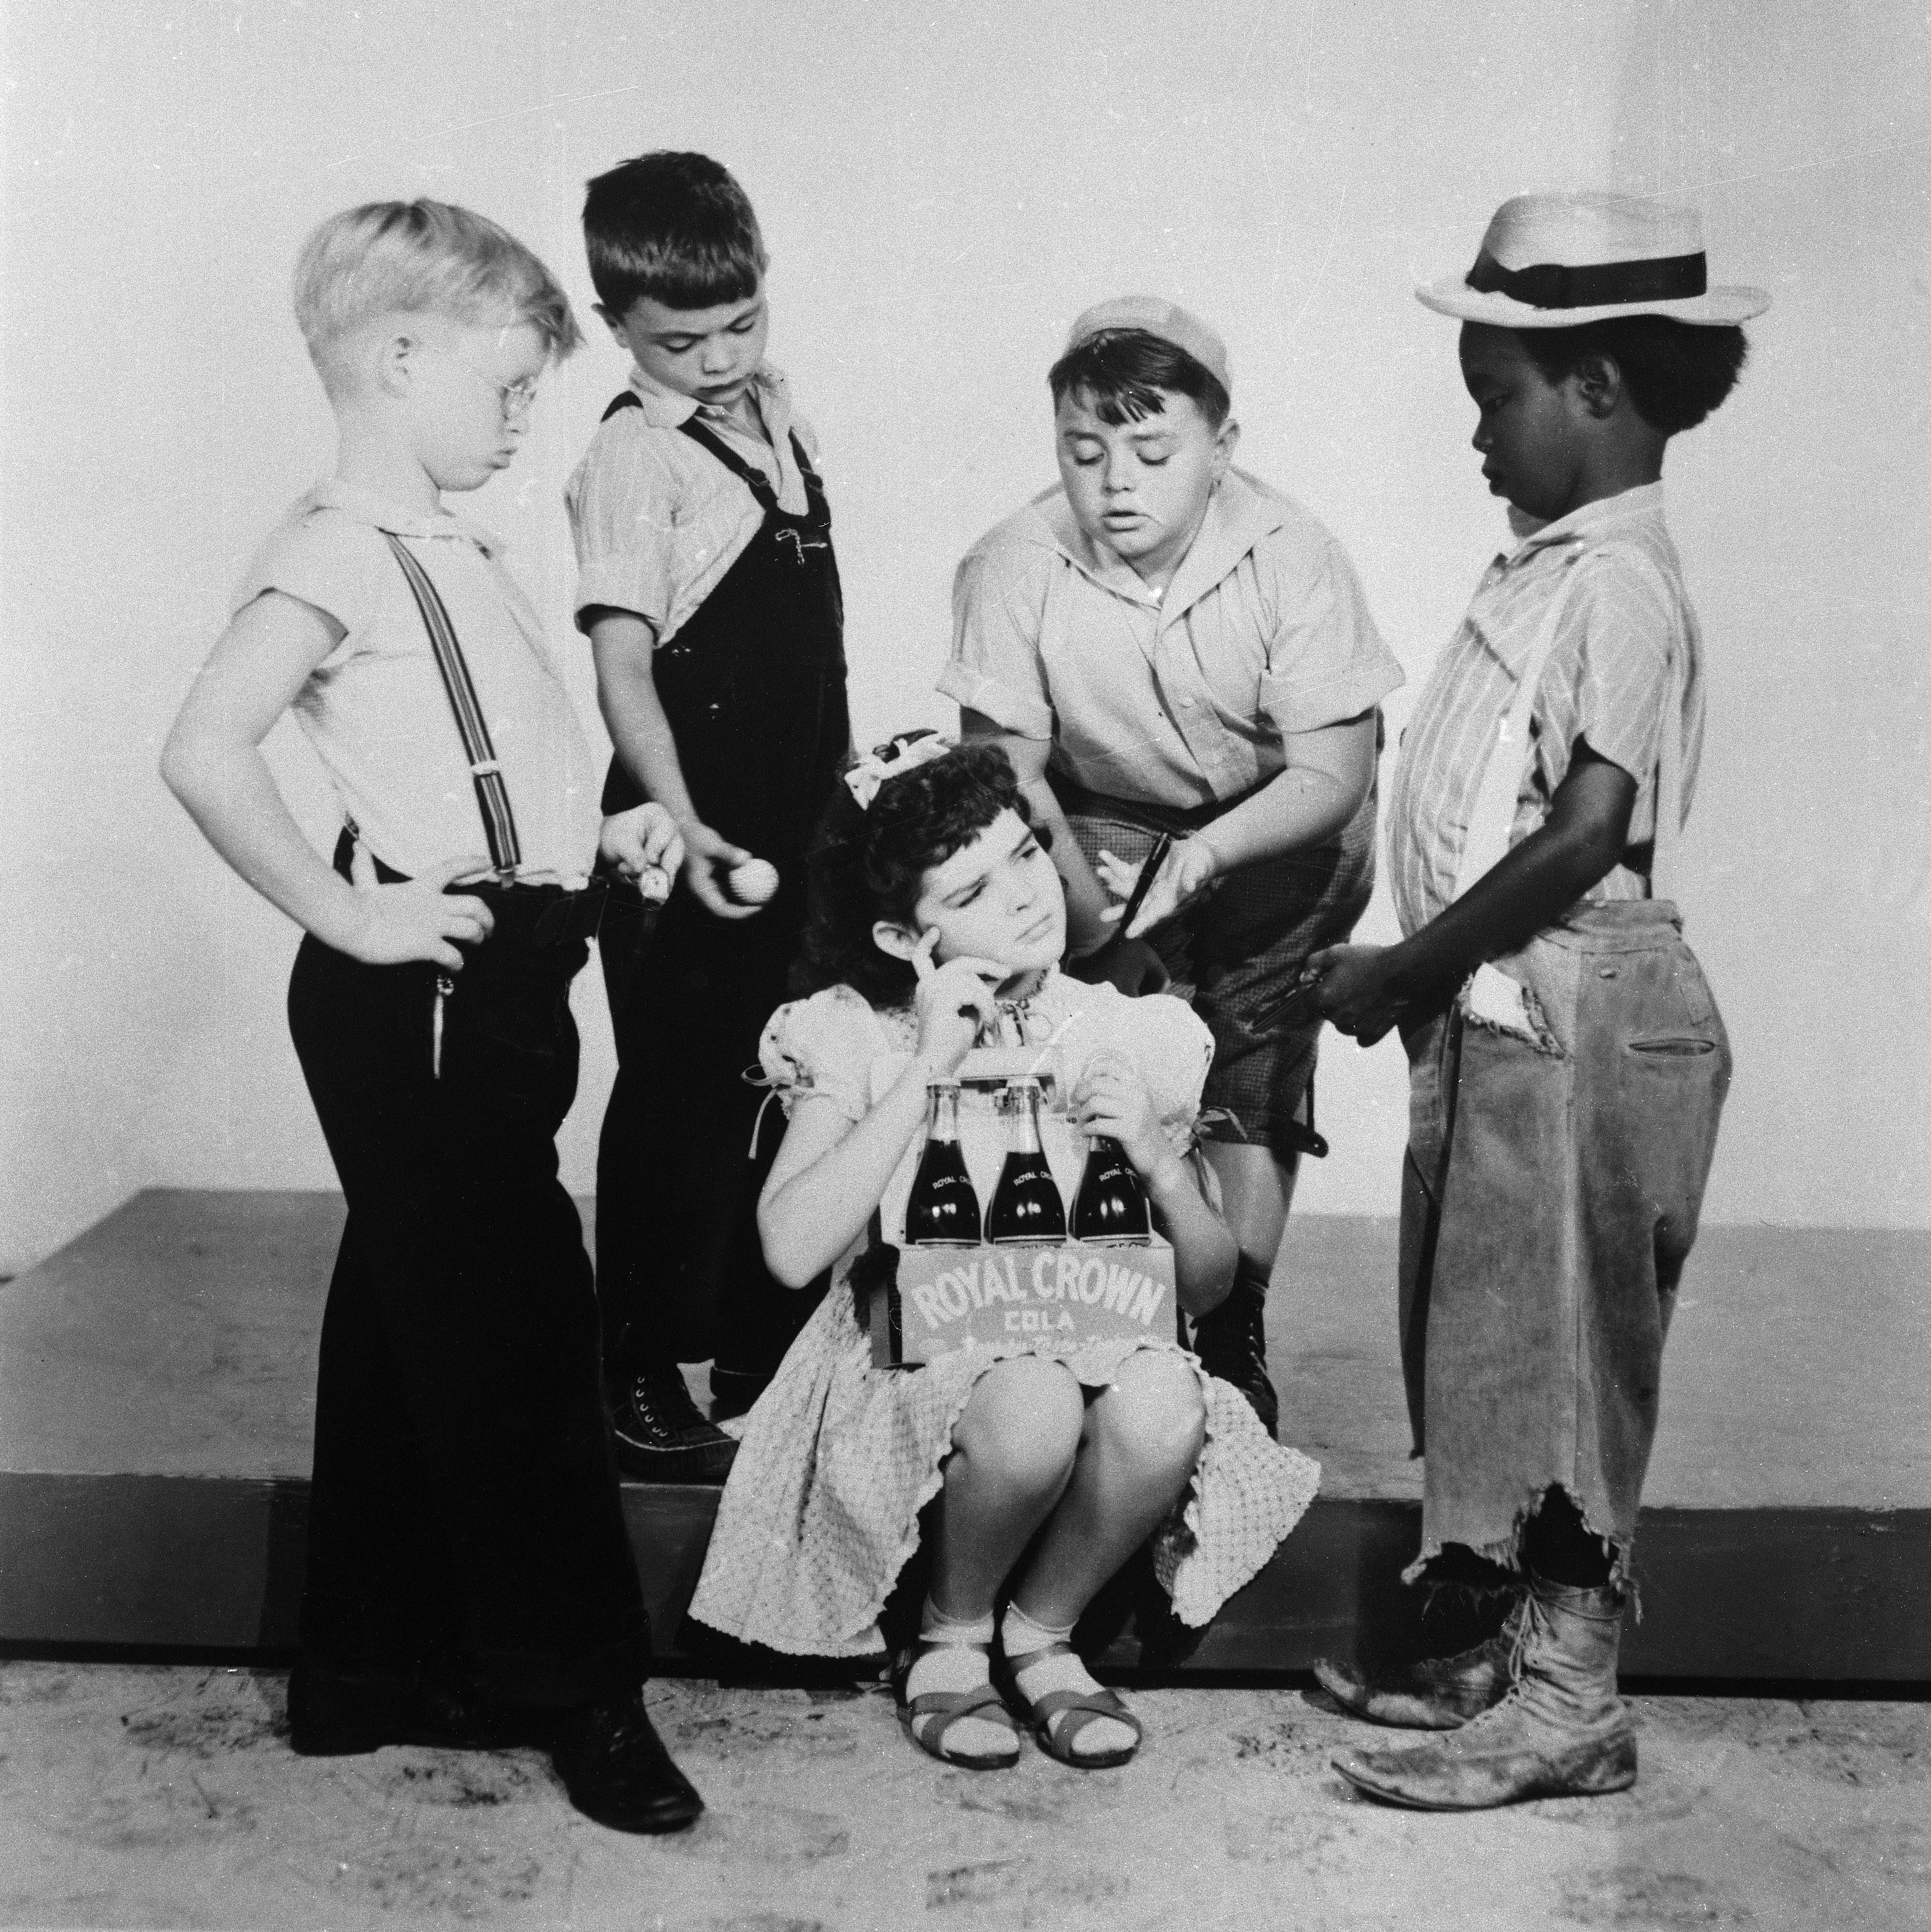 Darla Hood sits in the middle of The Little Rascals group, 1940  